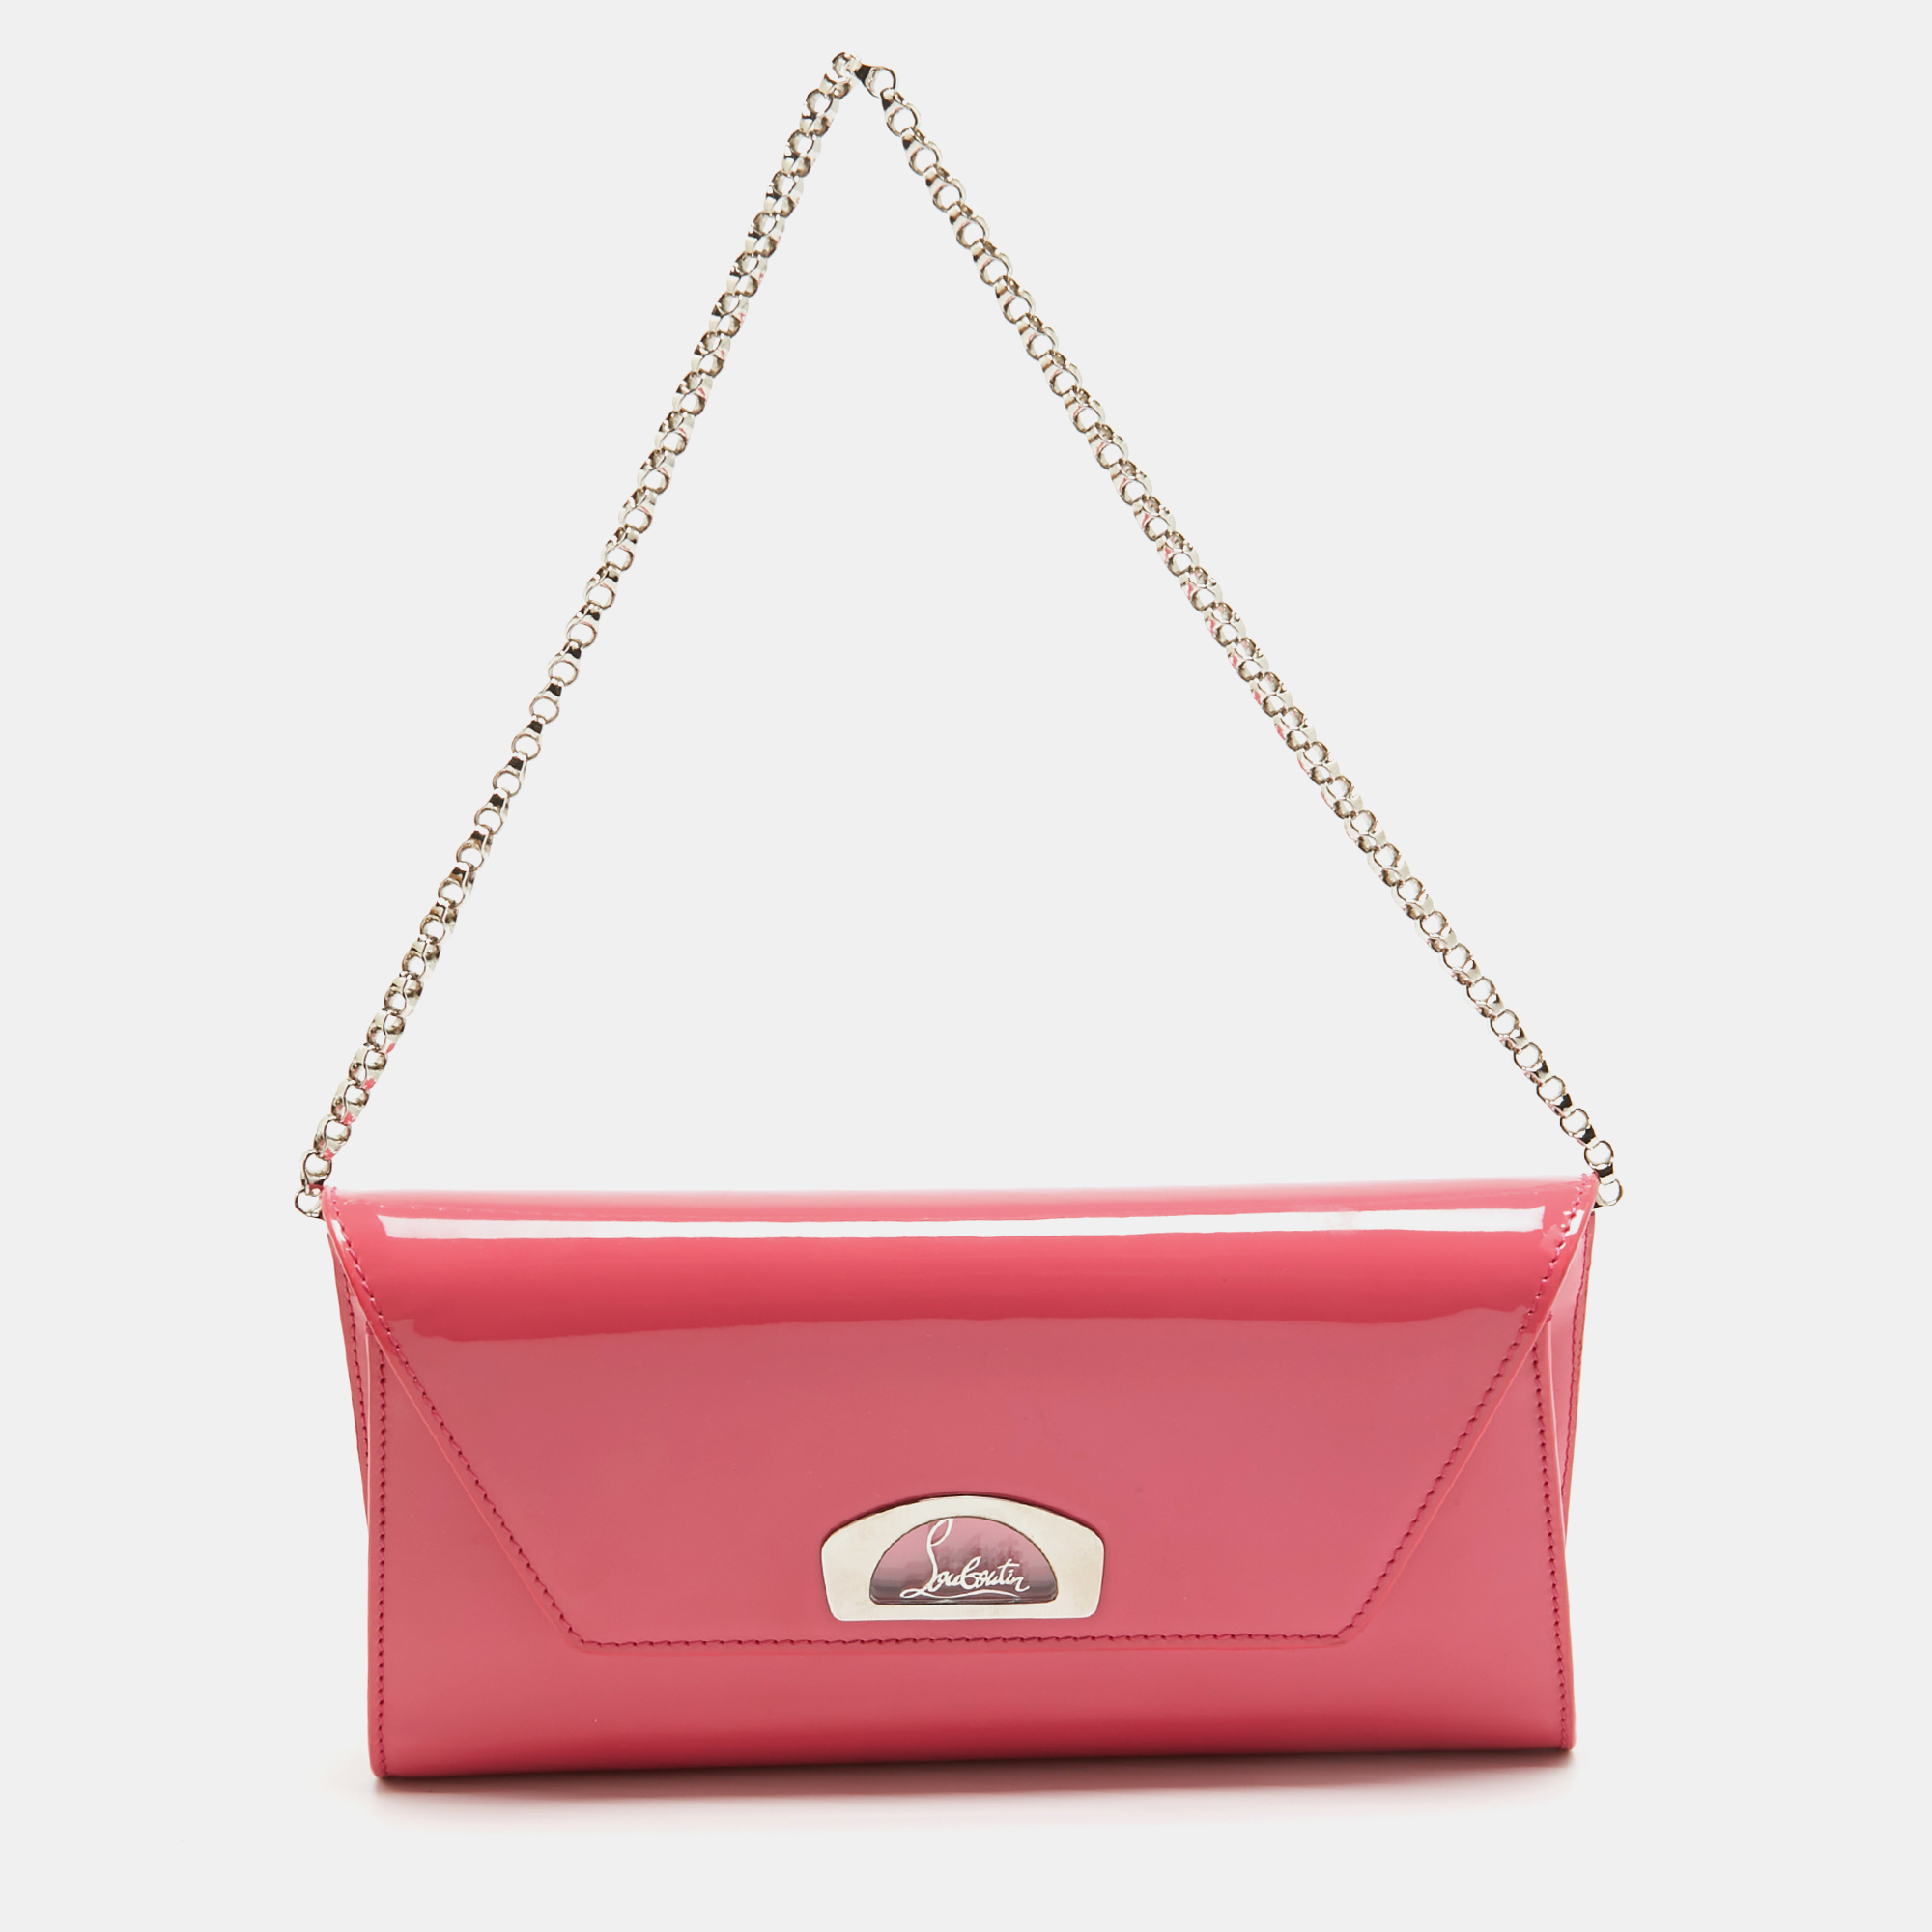 

Christian Louboutin Pink Patent Leather Vero Dodat Chain Clutch